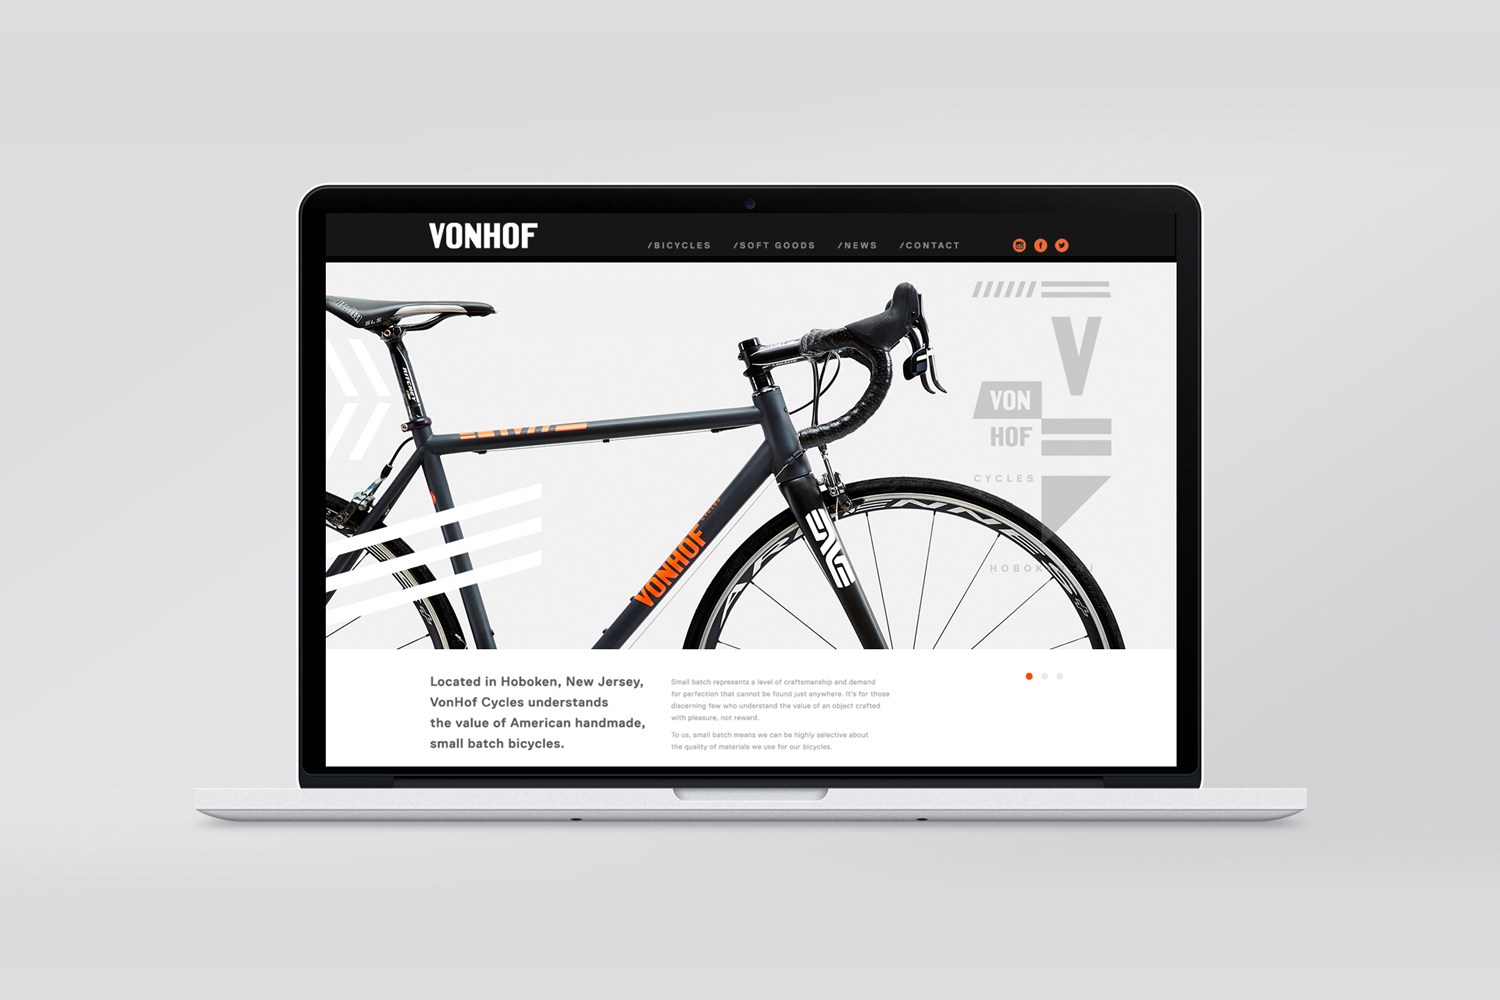 Brand identity and website for New Jersey-based VonHof Cycles by Franklyn, United States